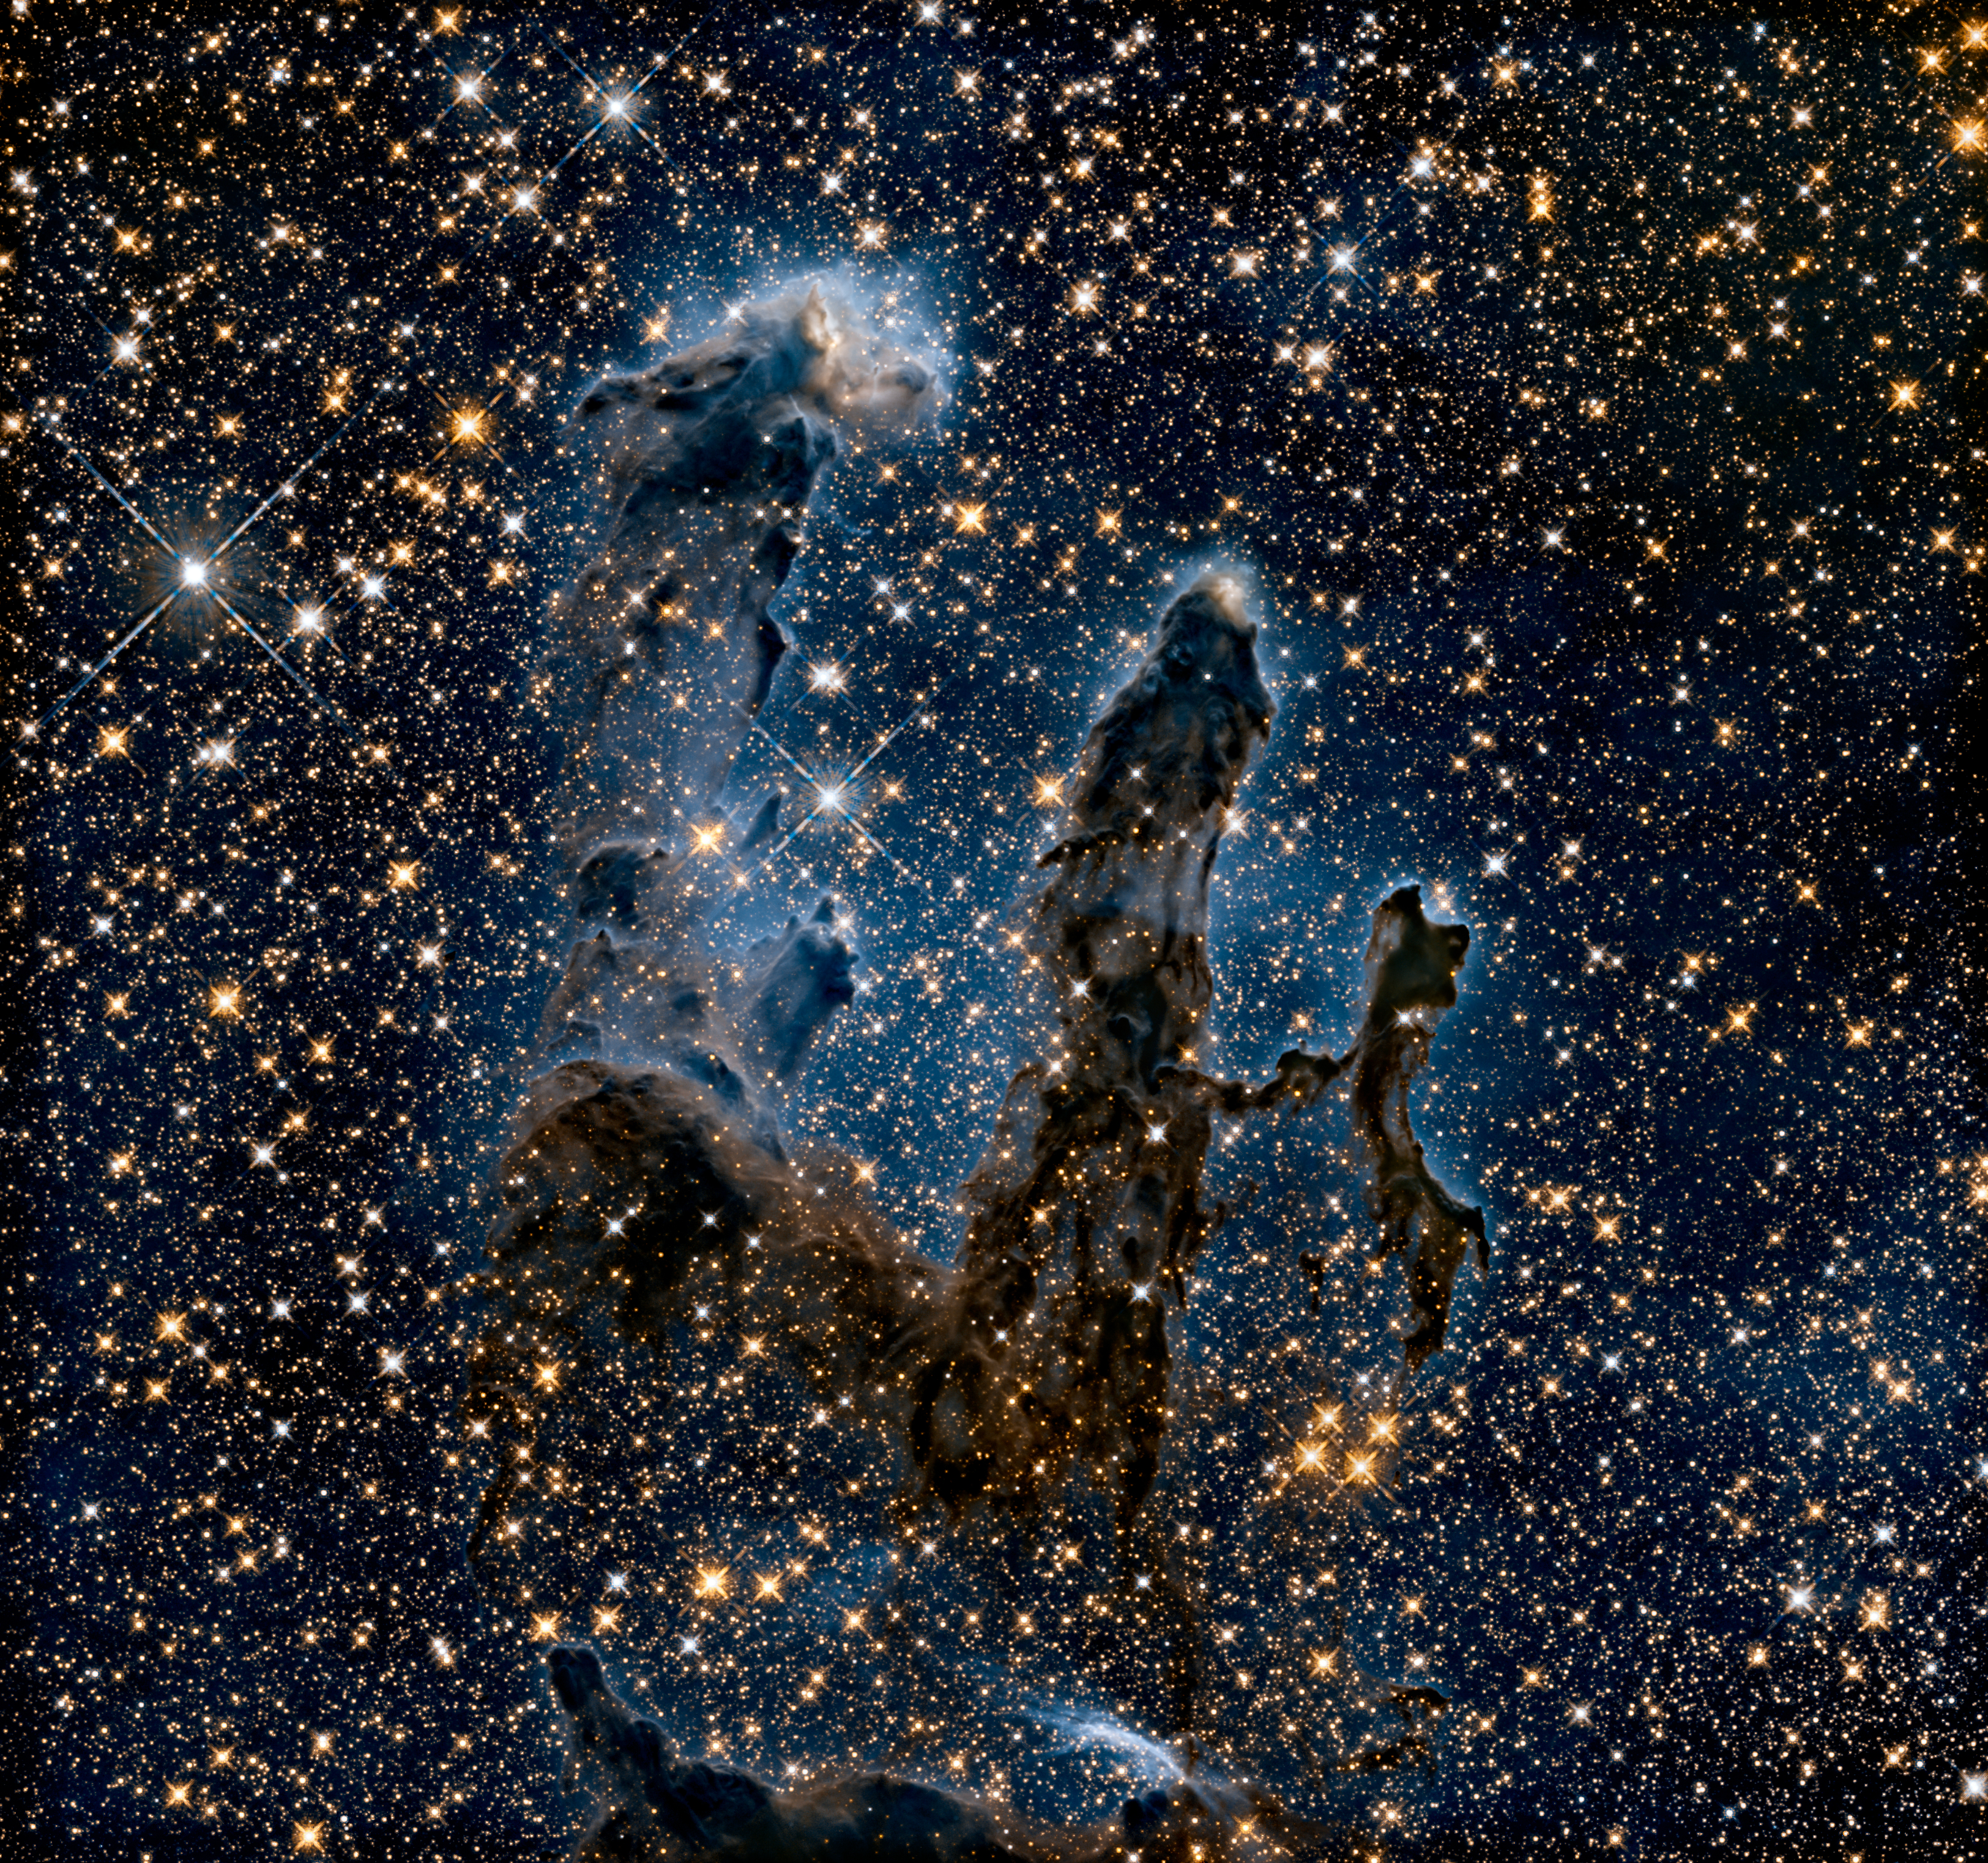 The Iconic 'Pillars of Creation' by NASA